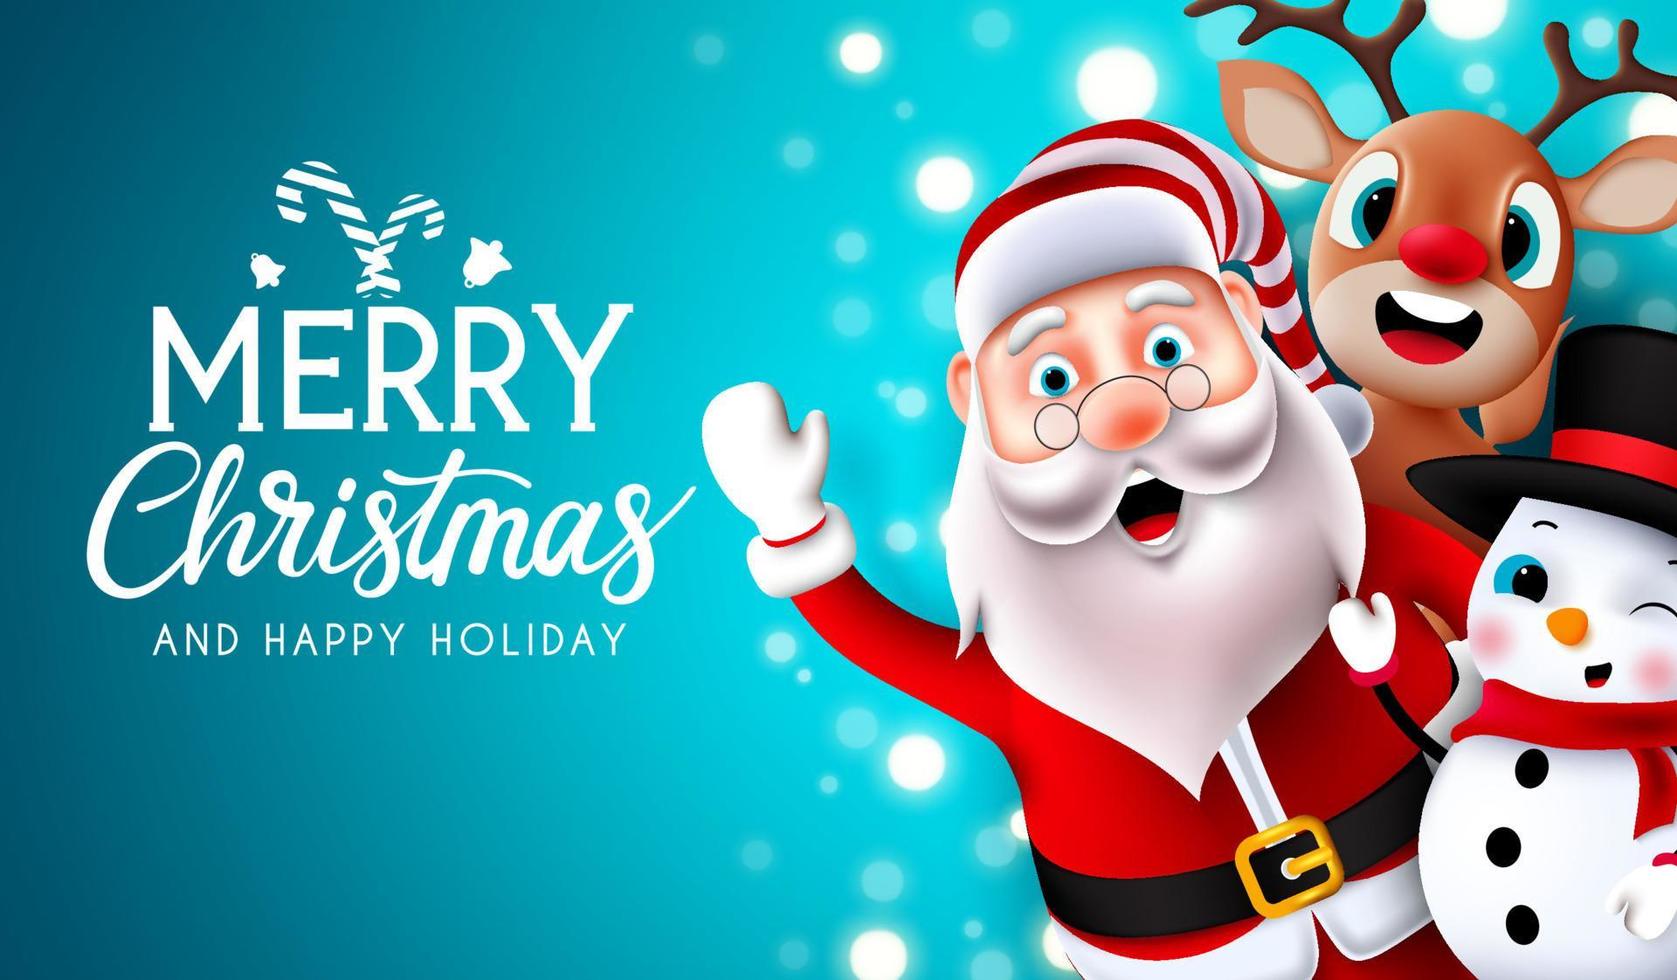 Merry christmas characters vector design. Merry christmas greeting text in blue space with waving santa claus, reindeer and snowman xmas character for holiday celebration. Vector illustration.